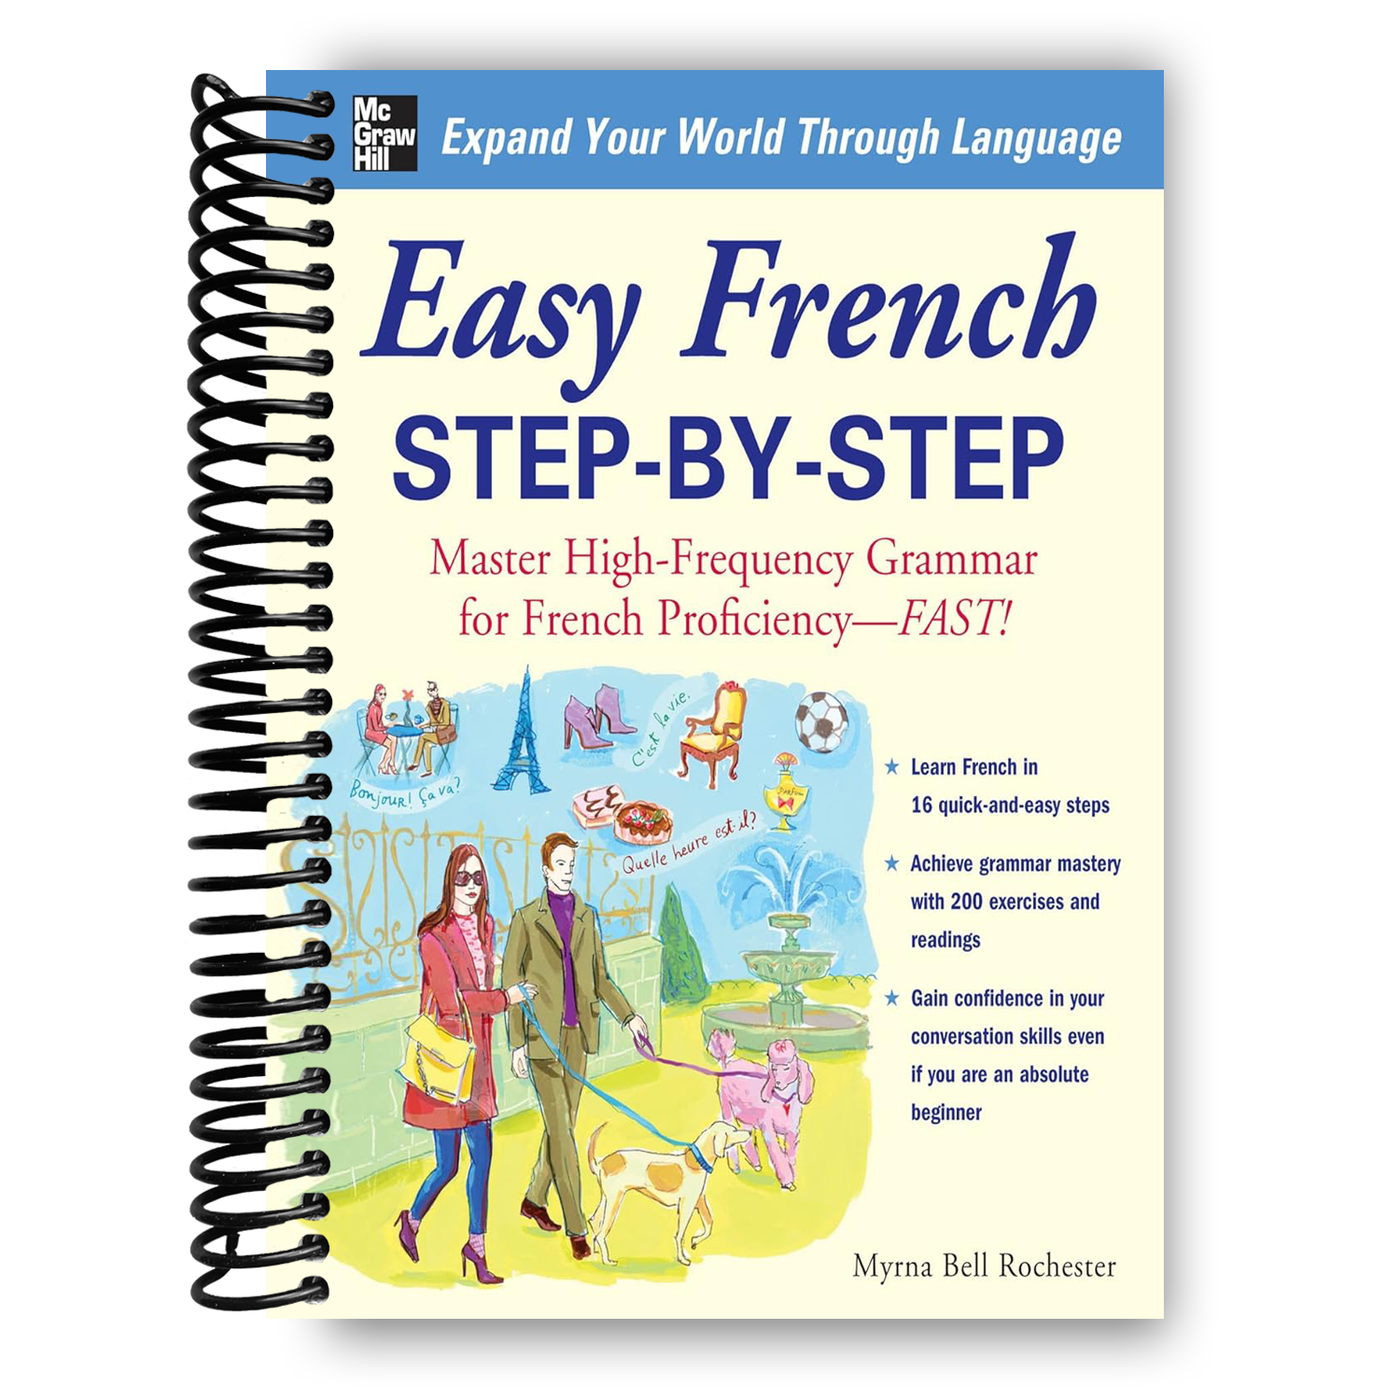 Easy French Step-by-Step (Spiral Bound)